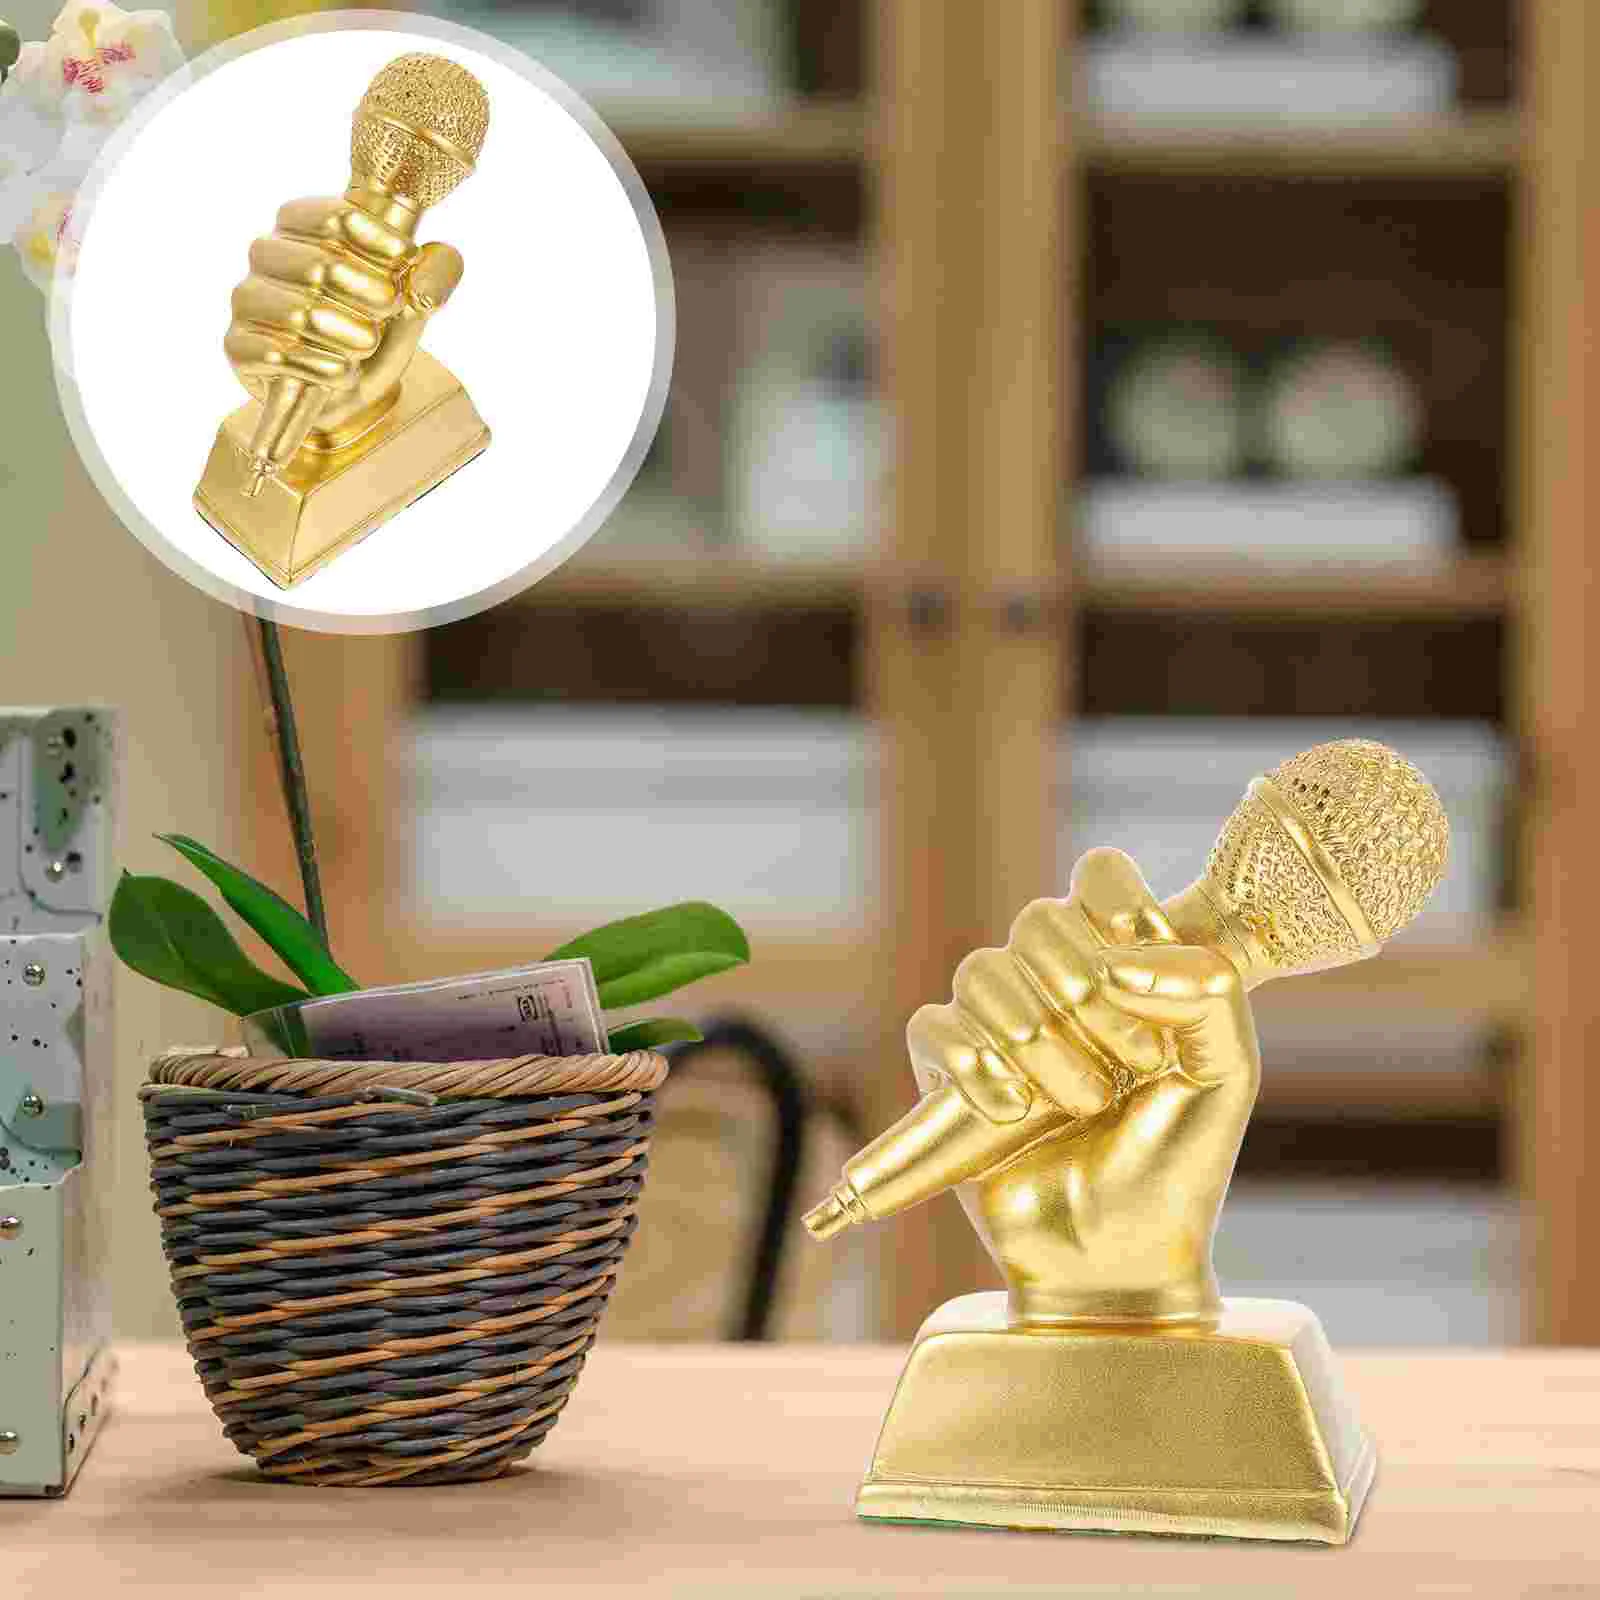 

Trophy Music Decors Award Singing Party Music Favors Awards Decor Trophies Gold Home Speech Accessory Children Karaoke Small